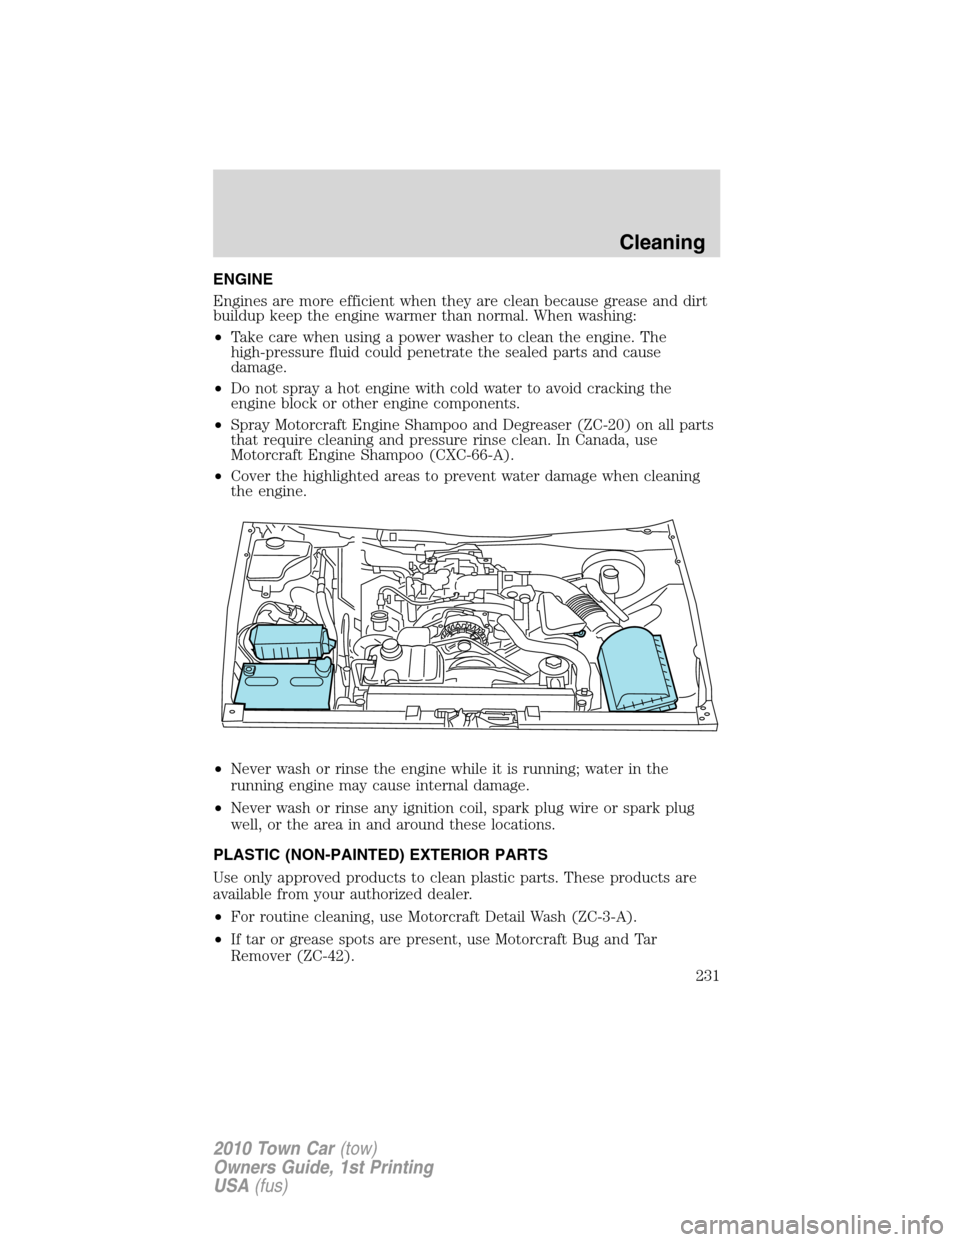 LINCOLN TOWN CAR 2010 Service Manual ENGINE
Engines are more efficient when they are clean because grease and dirt
buildup keep the engine warmer than normal. When washing:
•Take care when using a power washer to clean the engine. The
